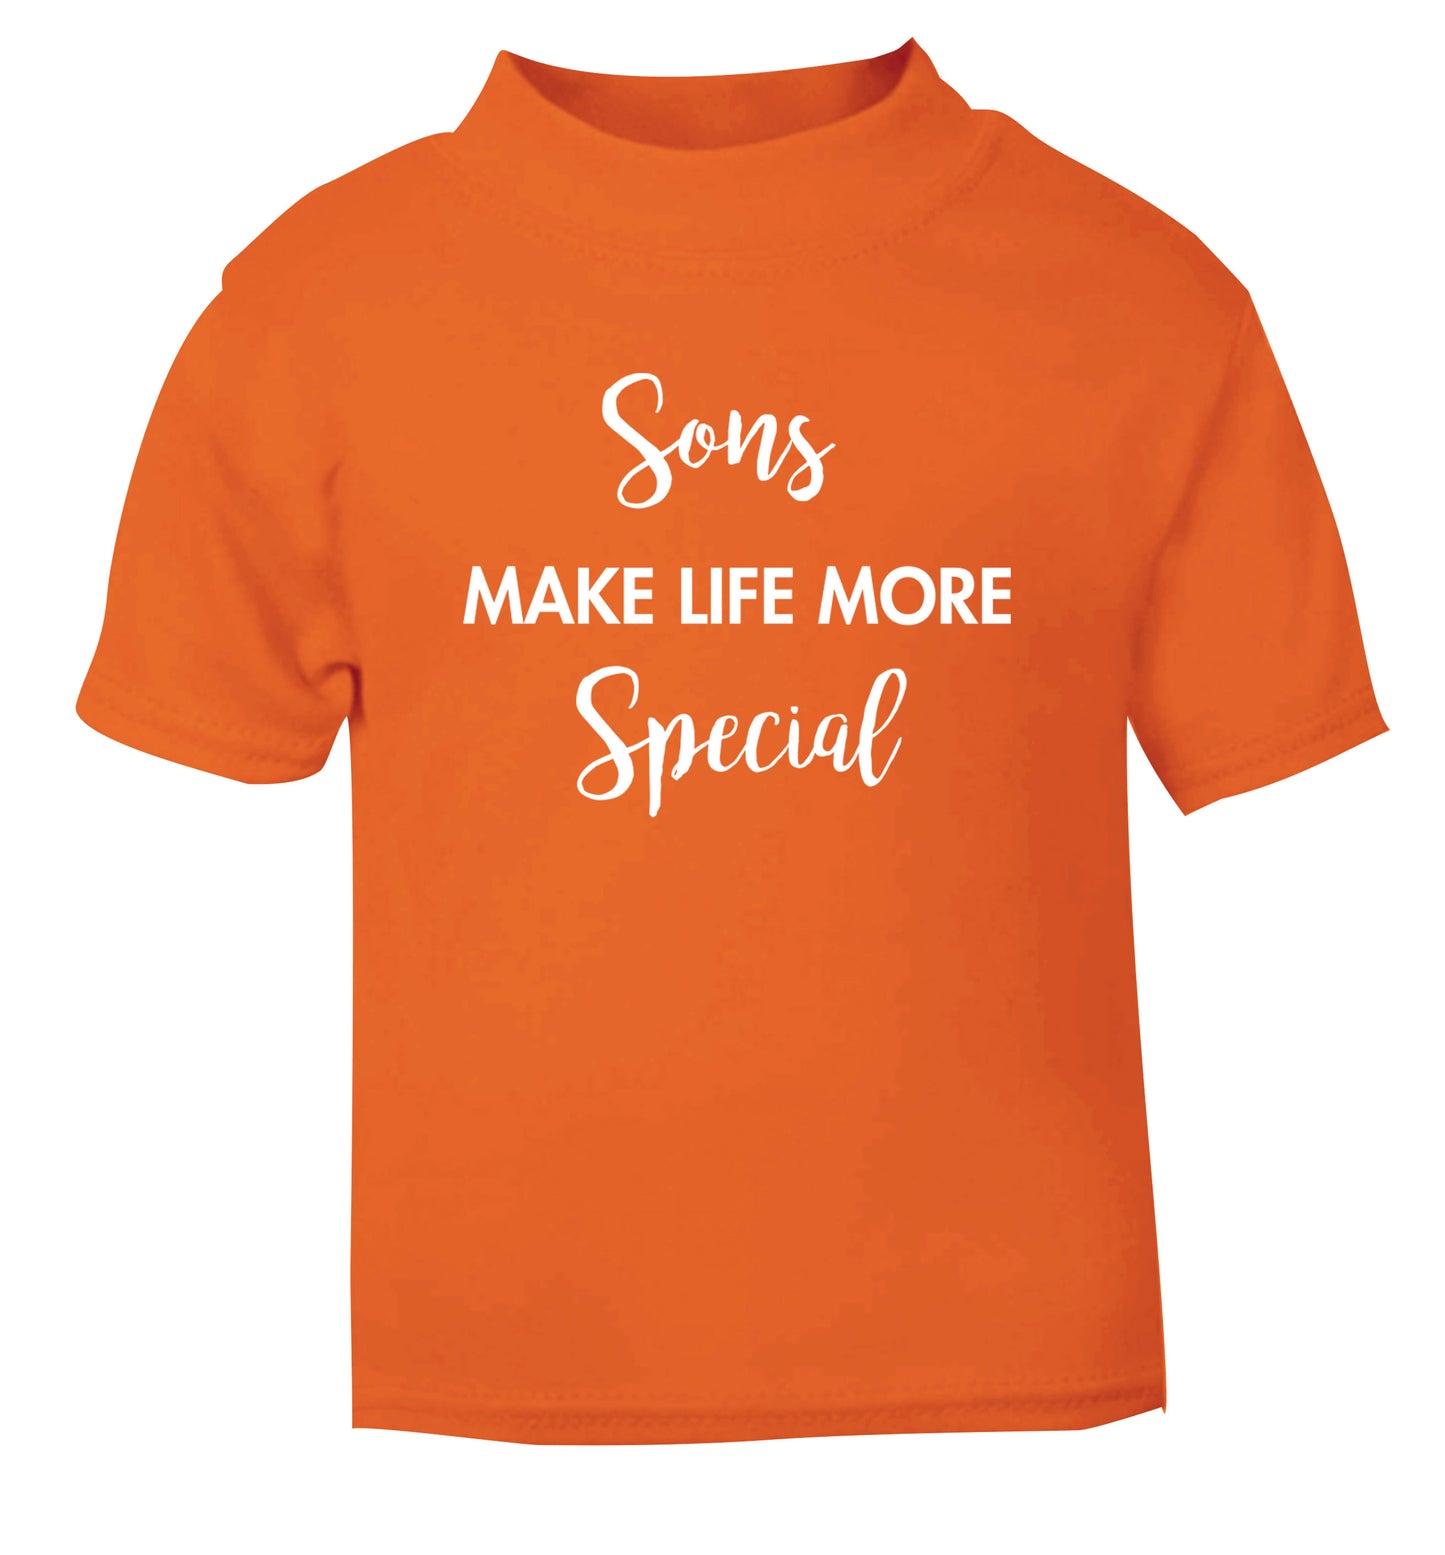 Sons make life more special orange Baby Toddler Tshirt 2 Years